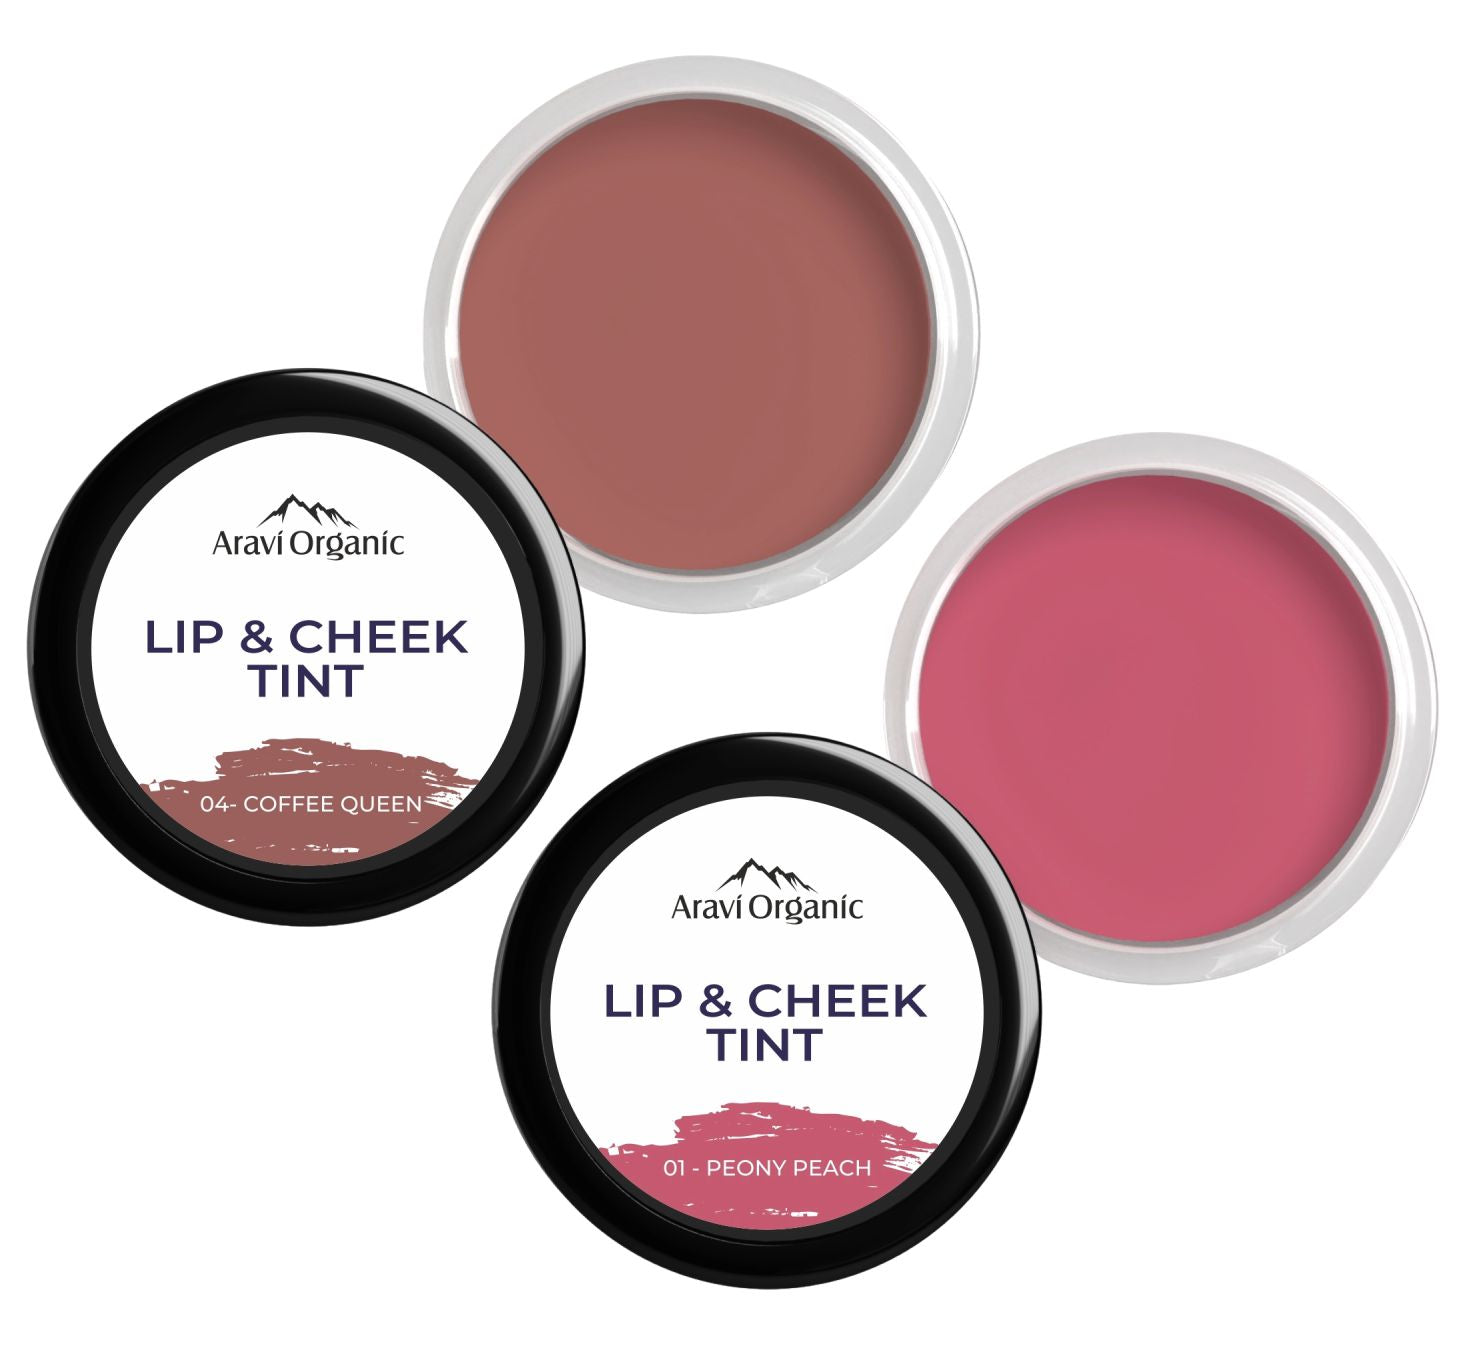 Lip and Cheek Tint for Everyday Use of Coffee Queen with Peony Peach